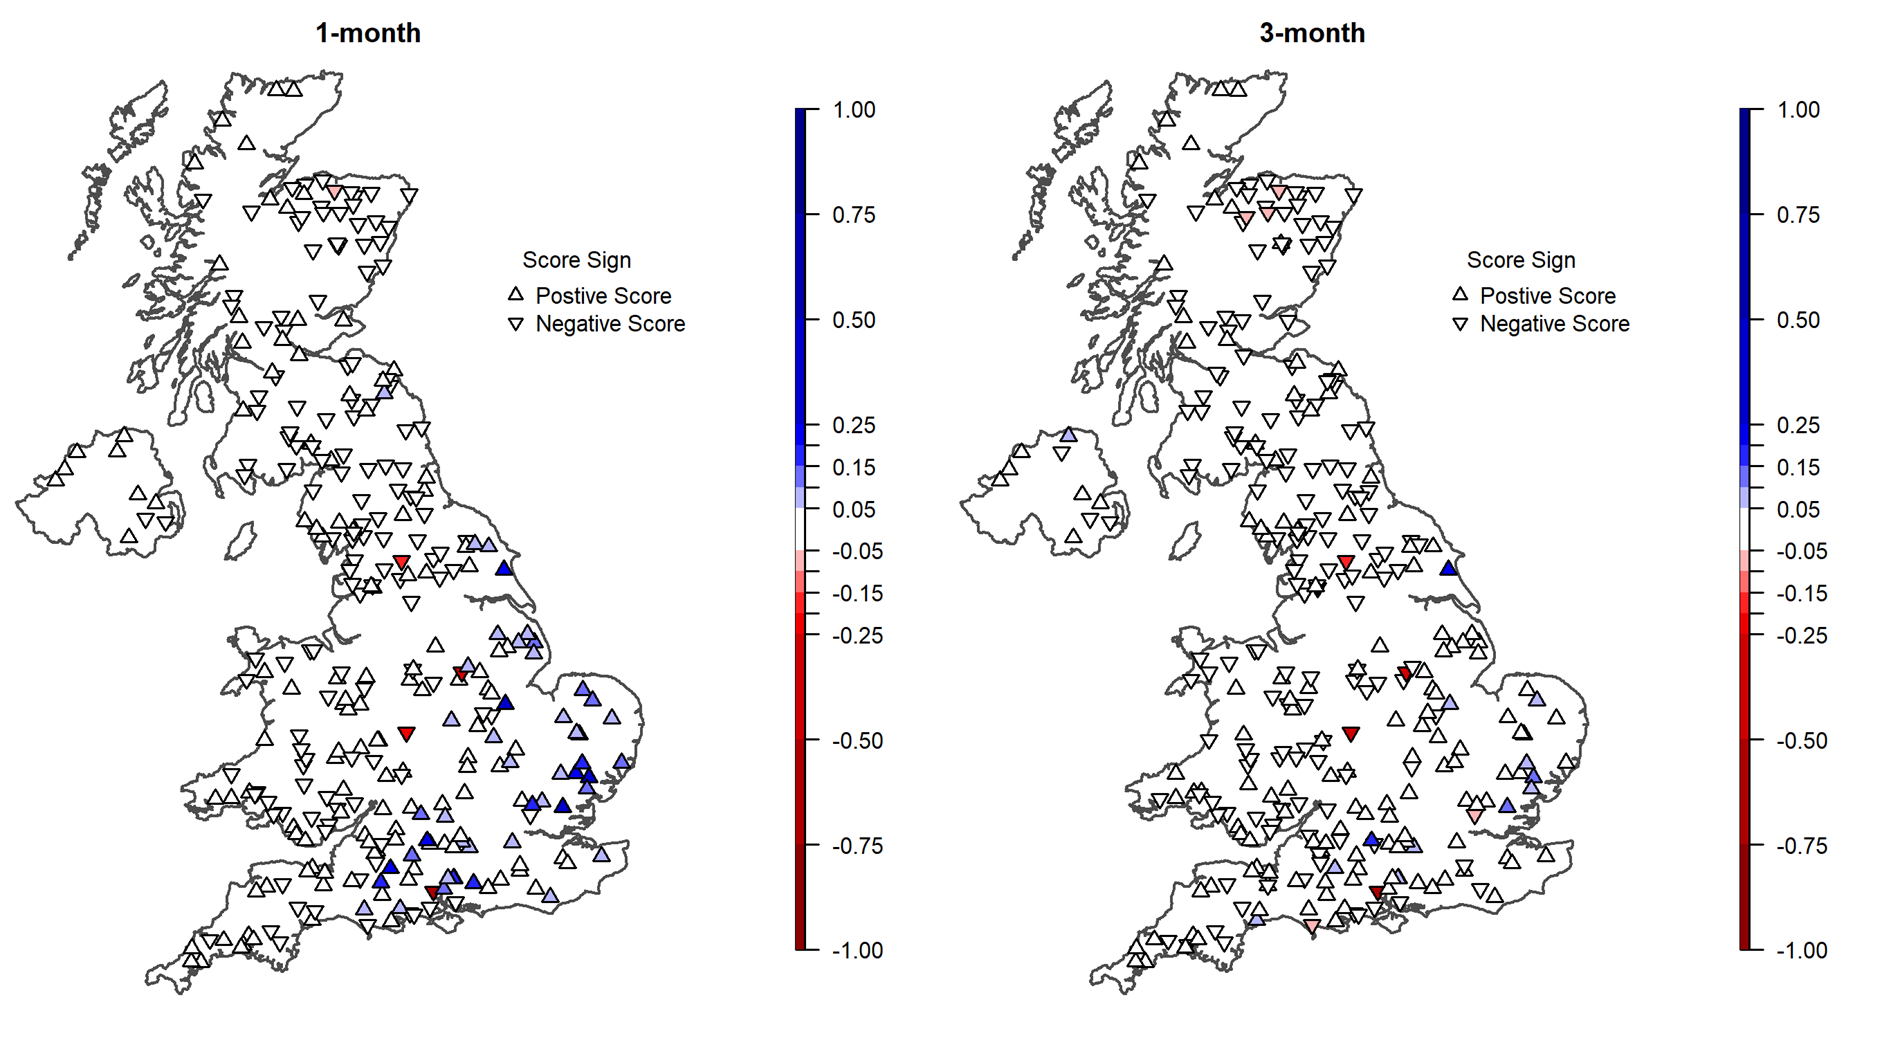 Figure 3: Map of difference in skill (CRPSS) between ESP forecasts generated using GR6J and GR4J at (left) 1-month lead time and (right) 3-month lead time. Blue shades signify improved forecast skill with GR6J compared to GR4J, red shades represent the reverse, while white signifies negligeable differences.